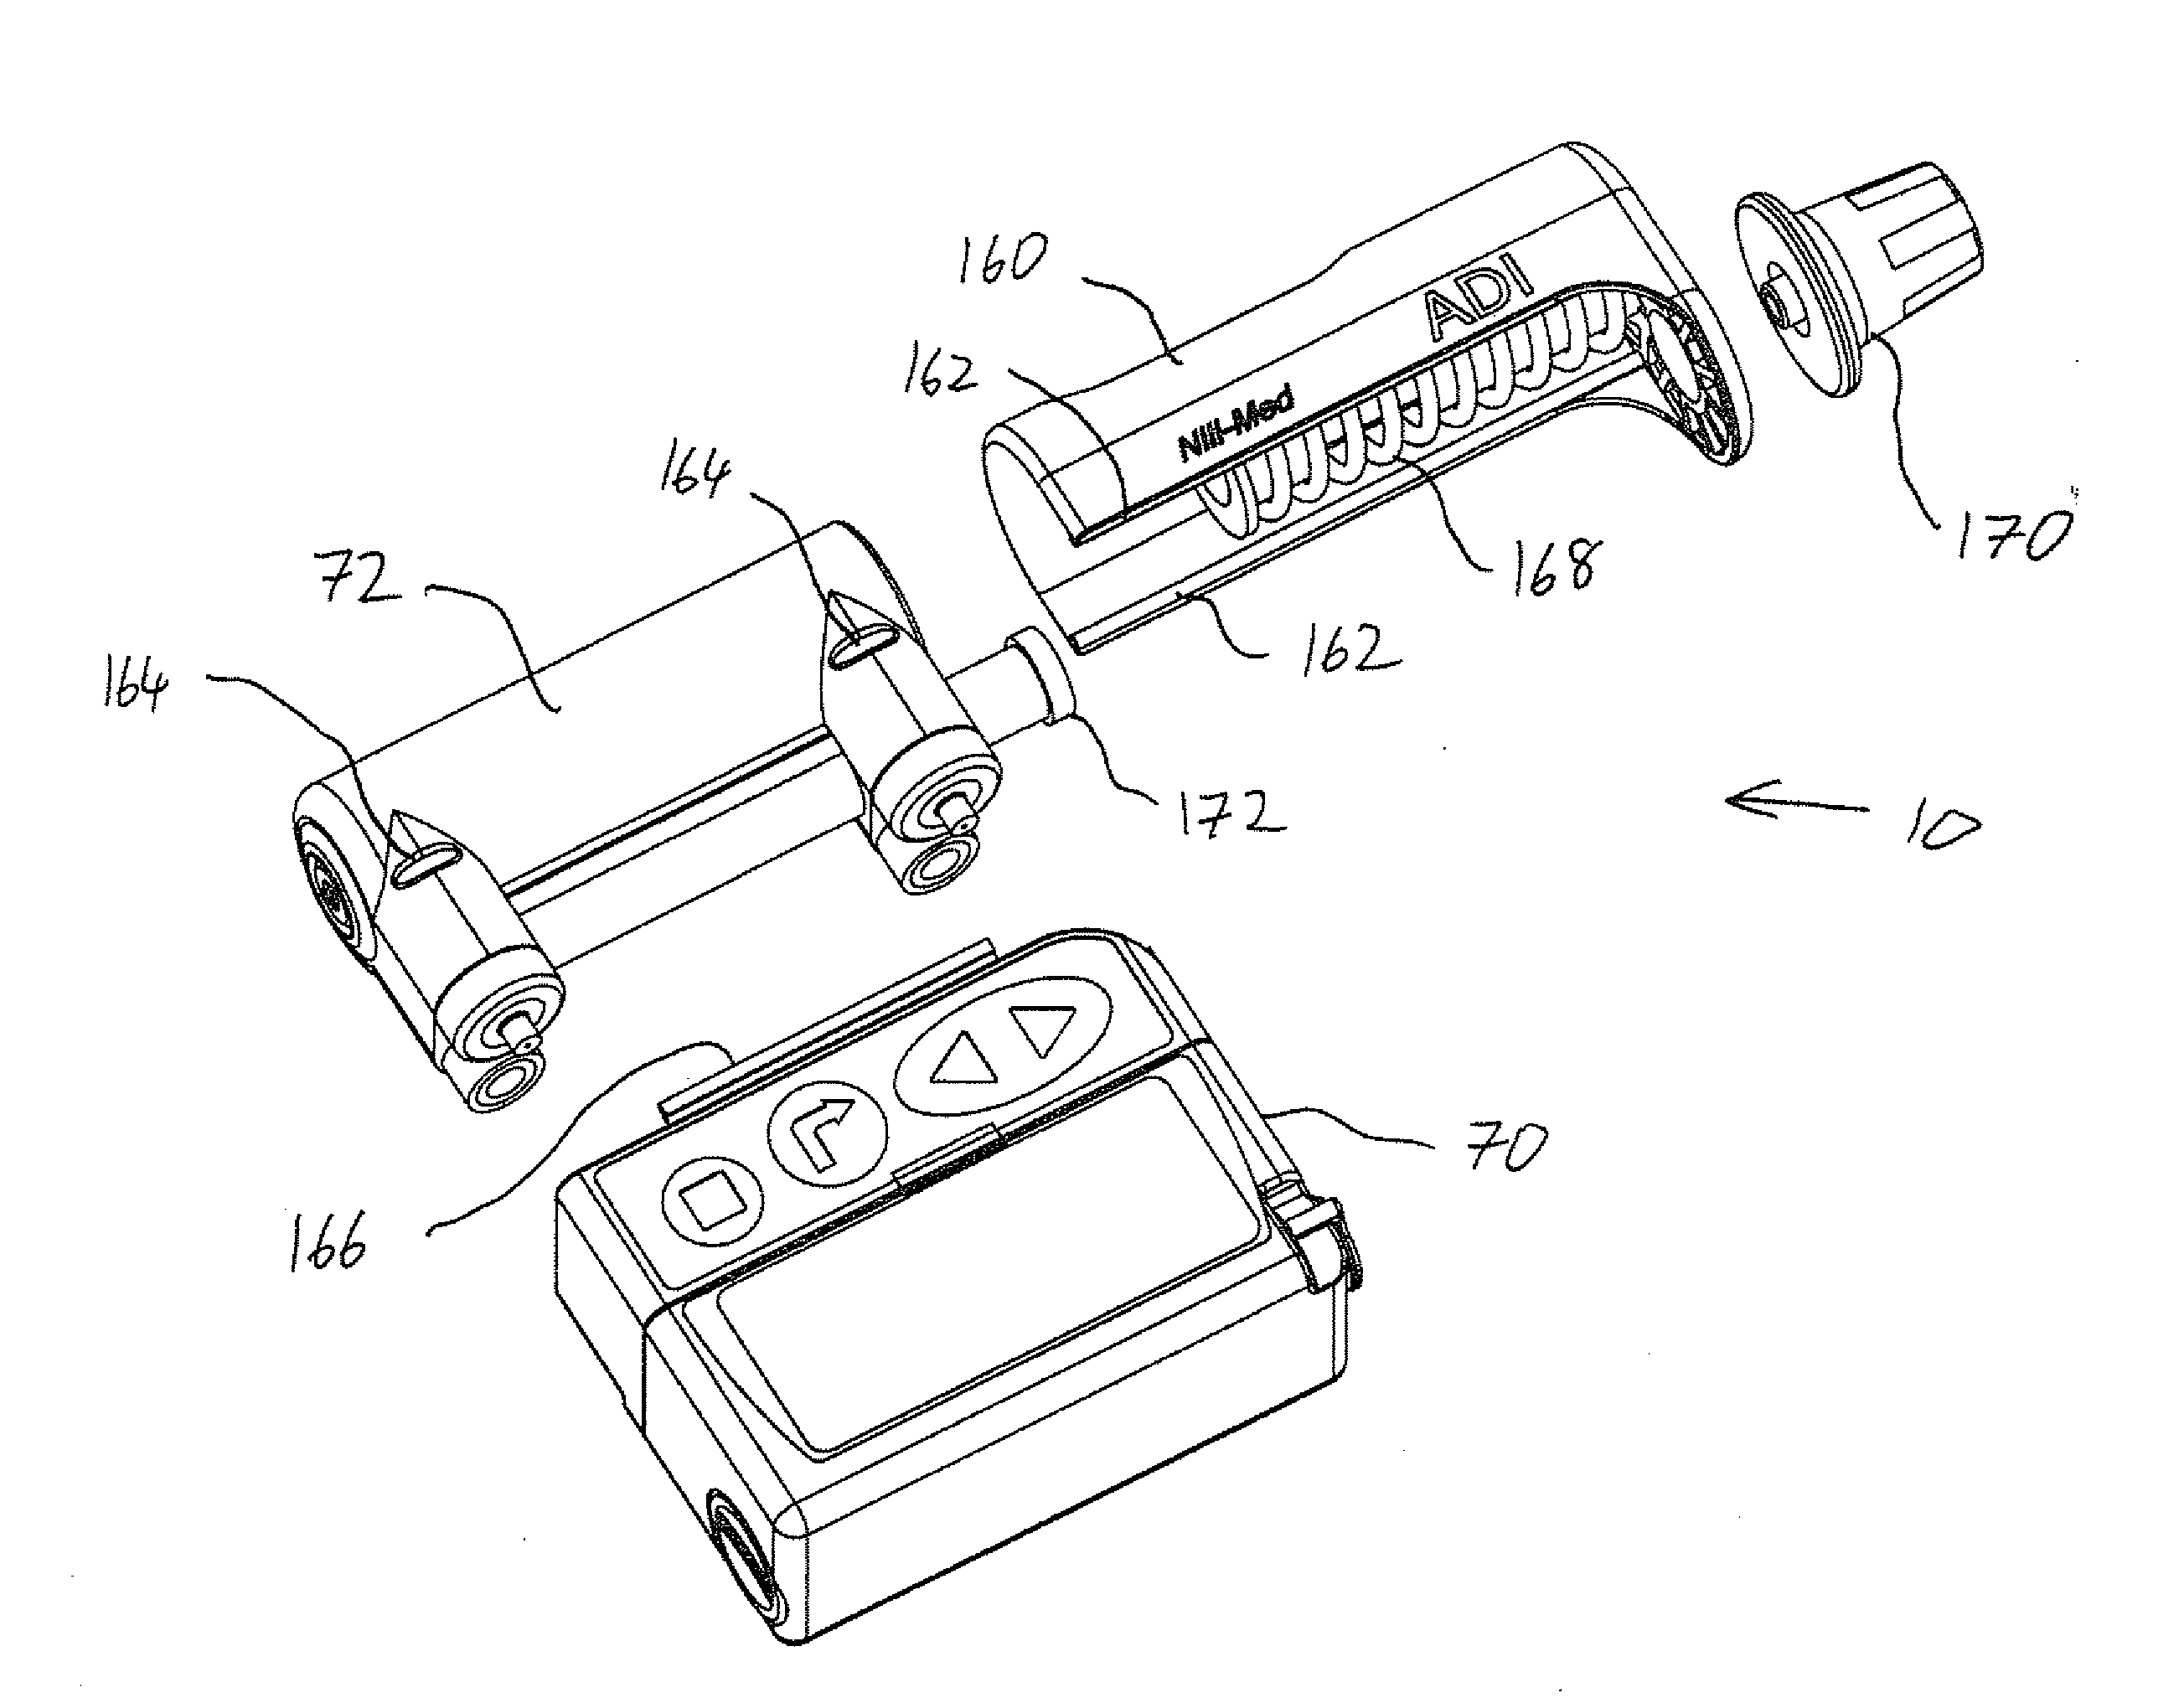 Drug delivery device and method